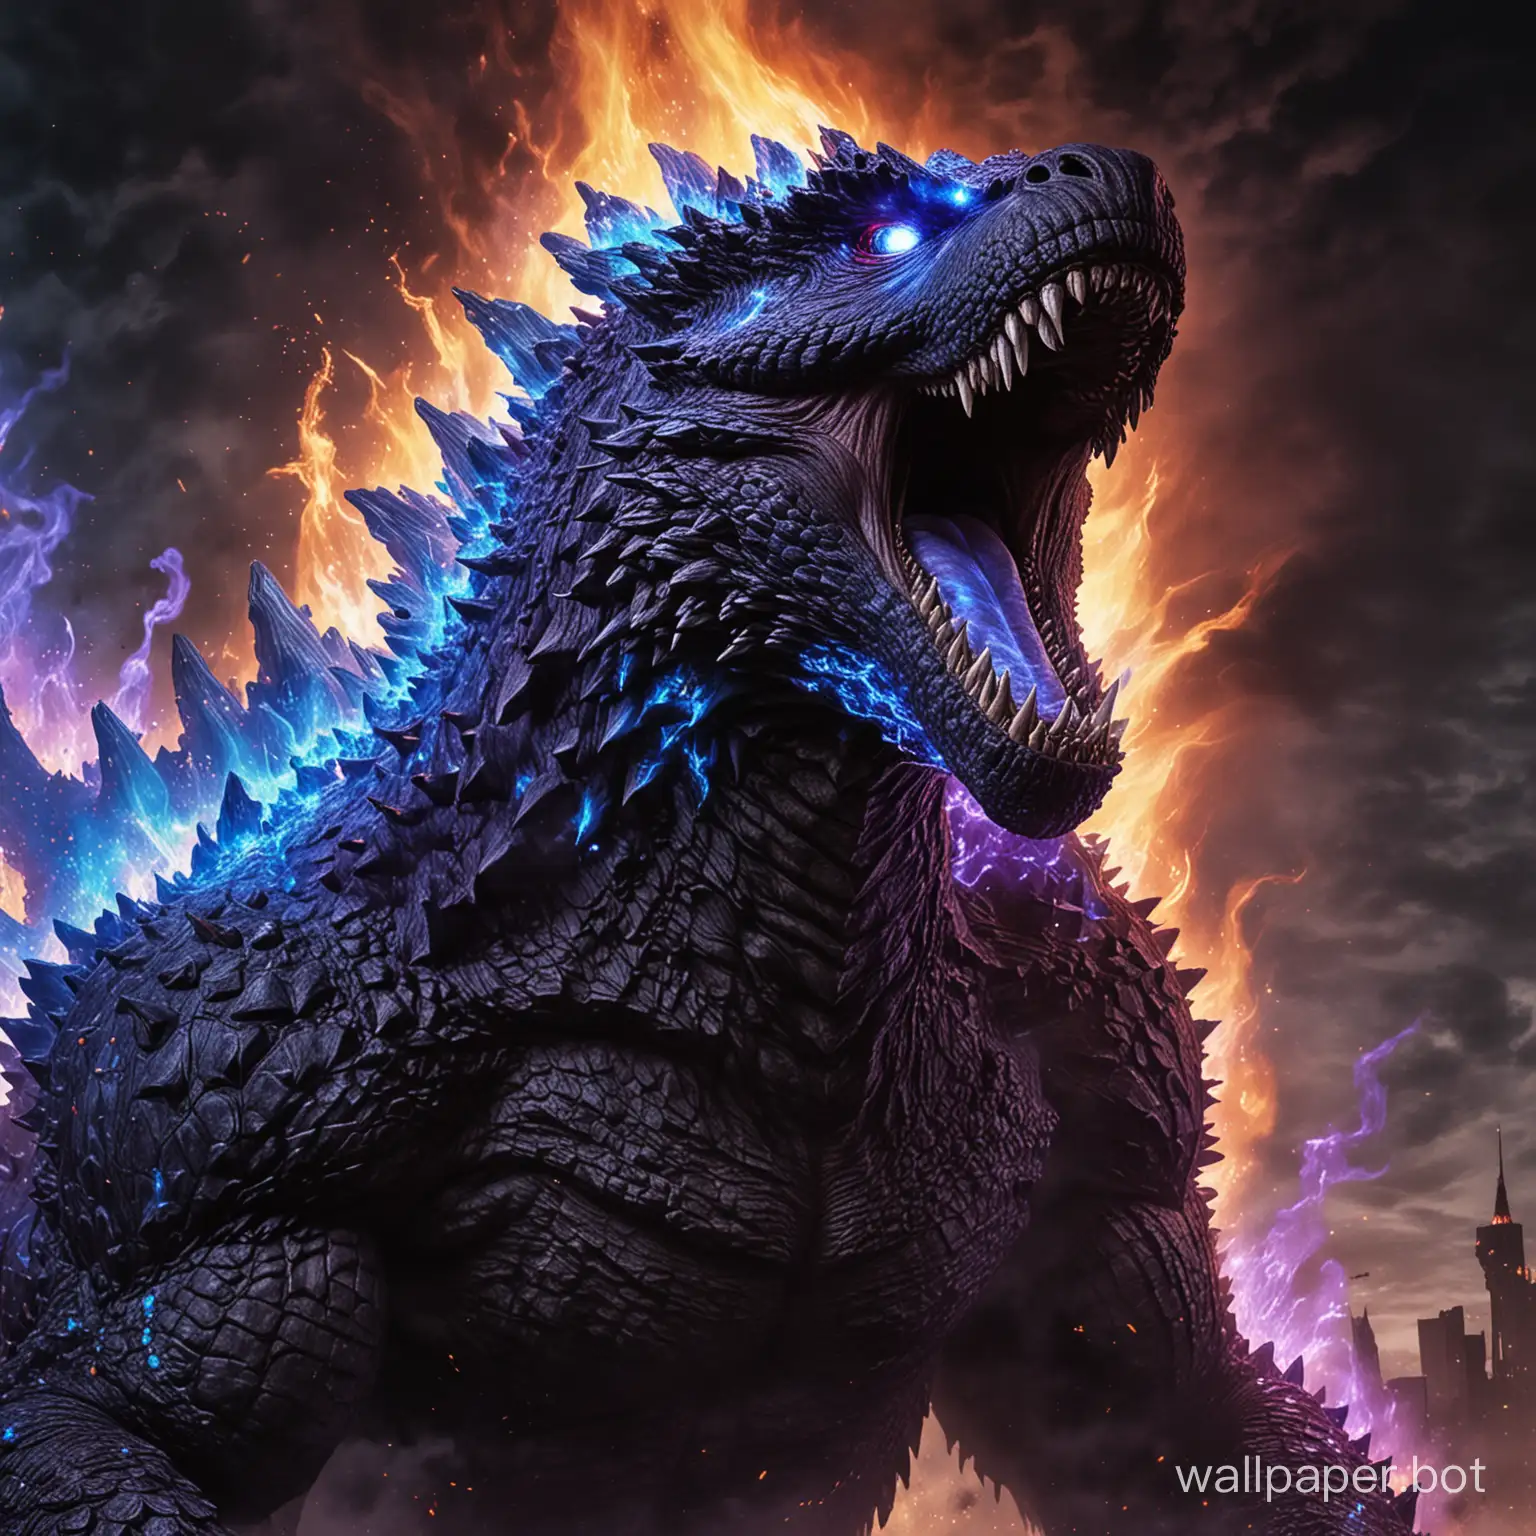 The enormous Godzilla dark purple emits blue flames from its mouth